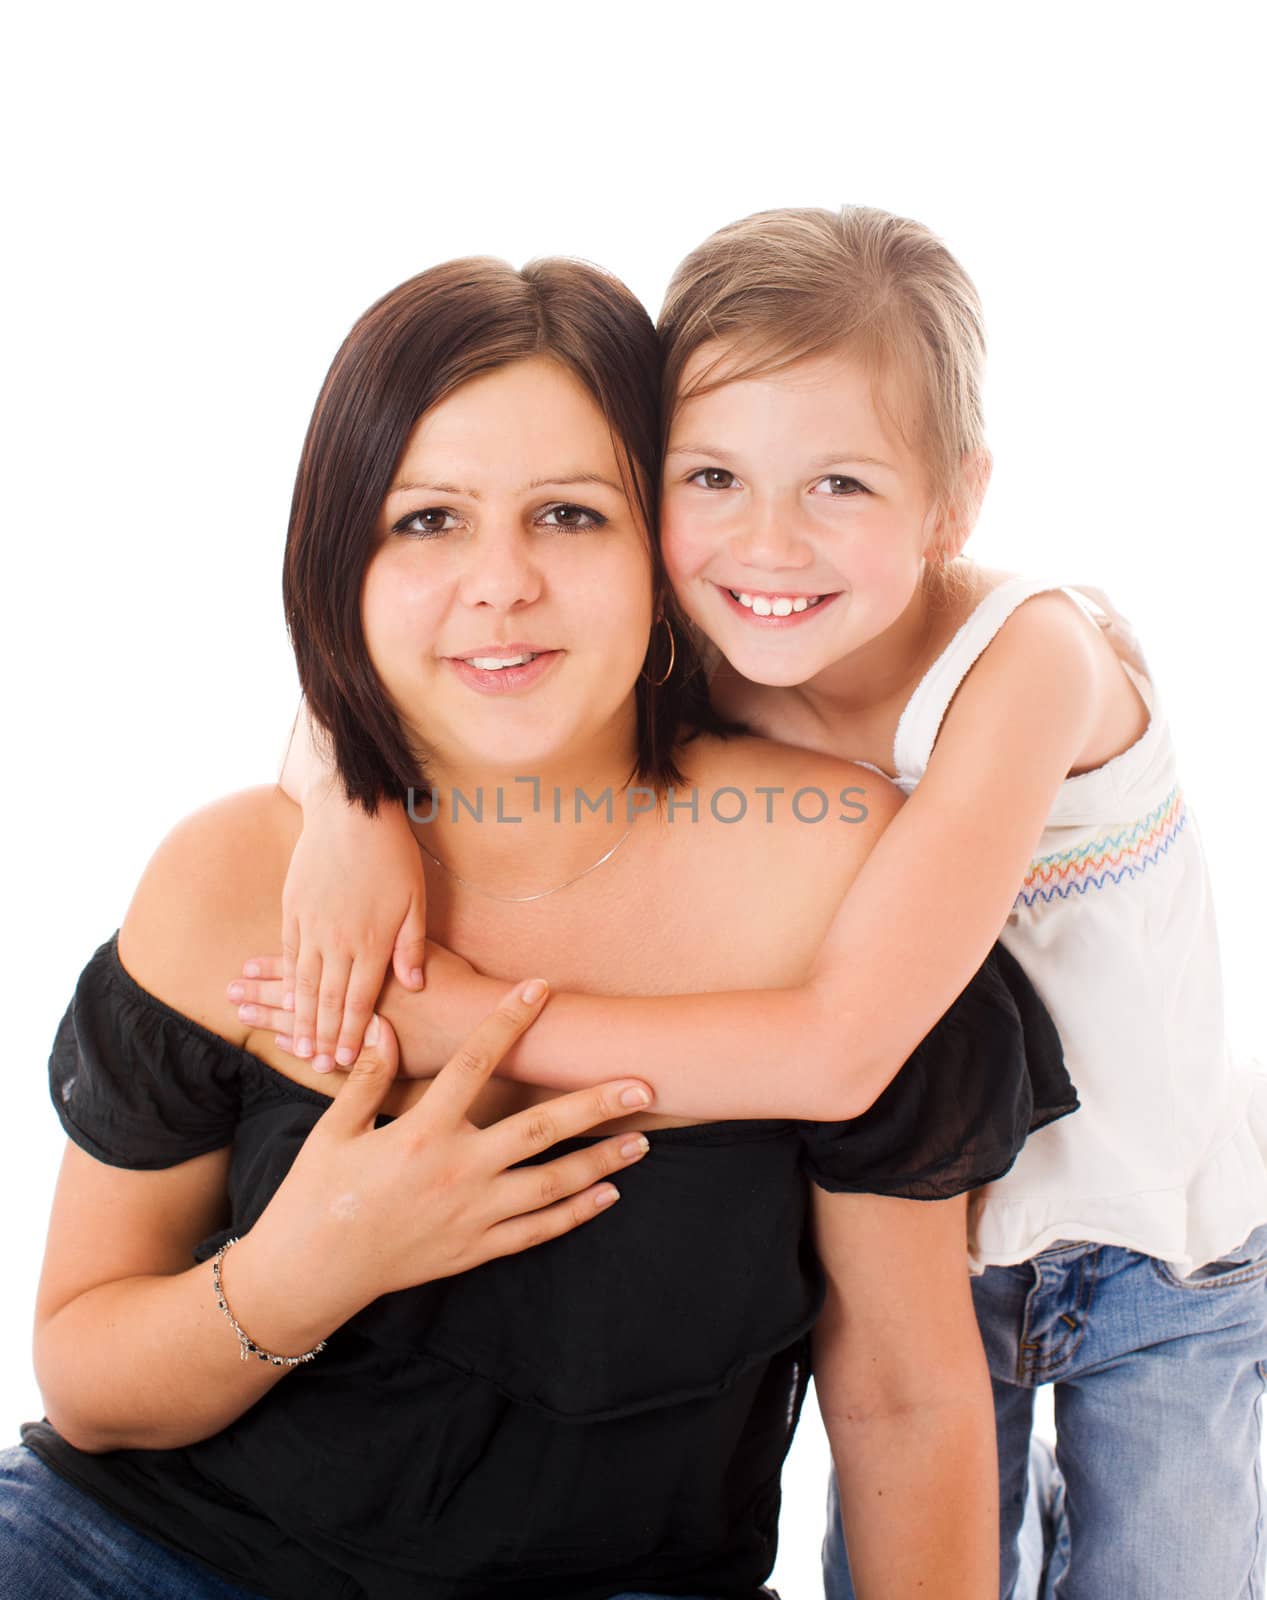 Mother and daughter posing together isolated on white